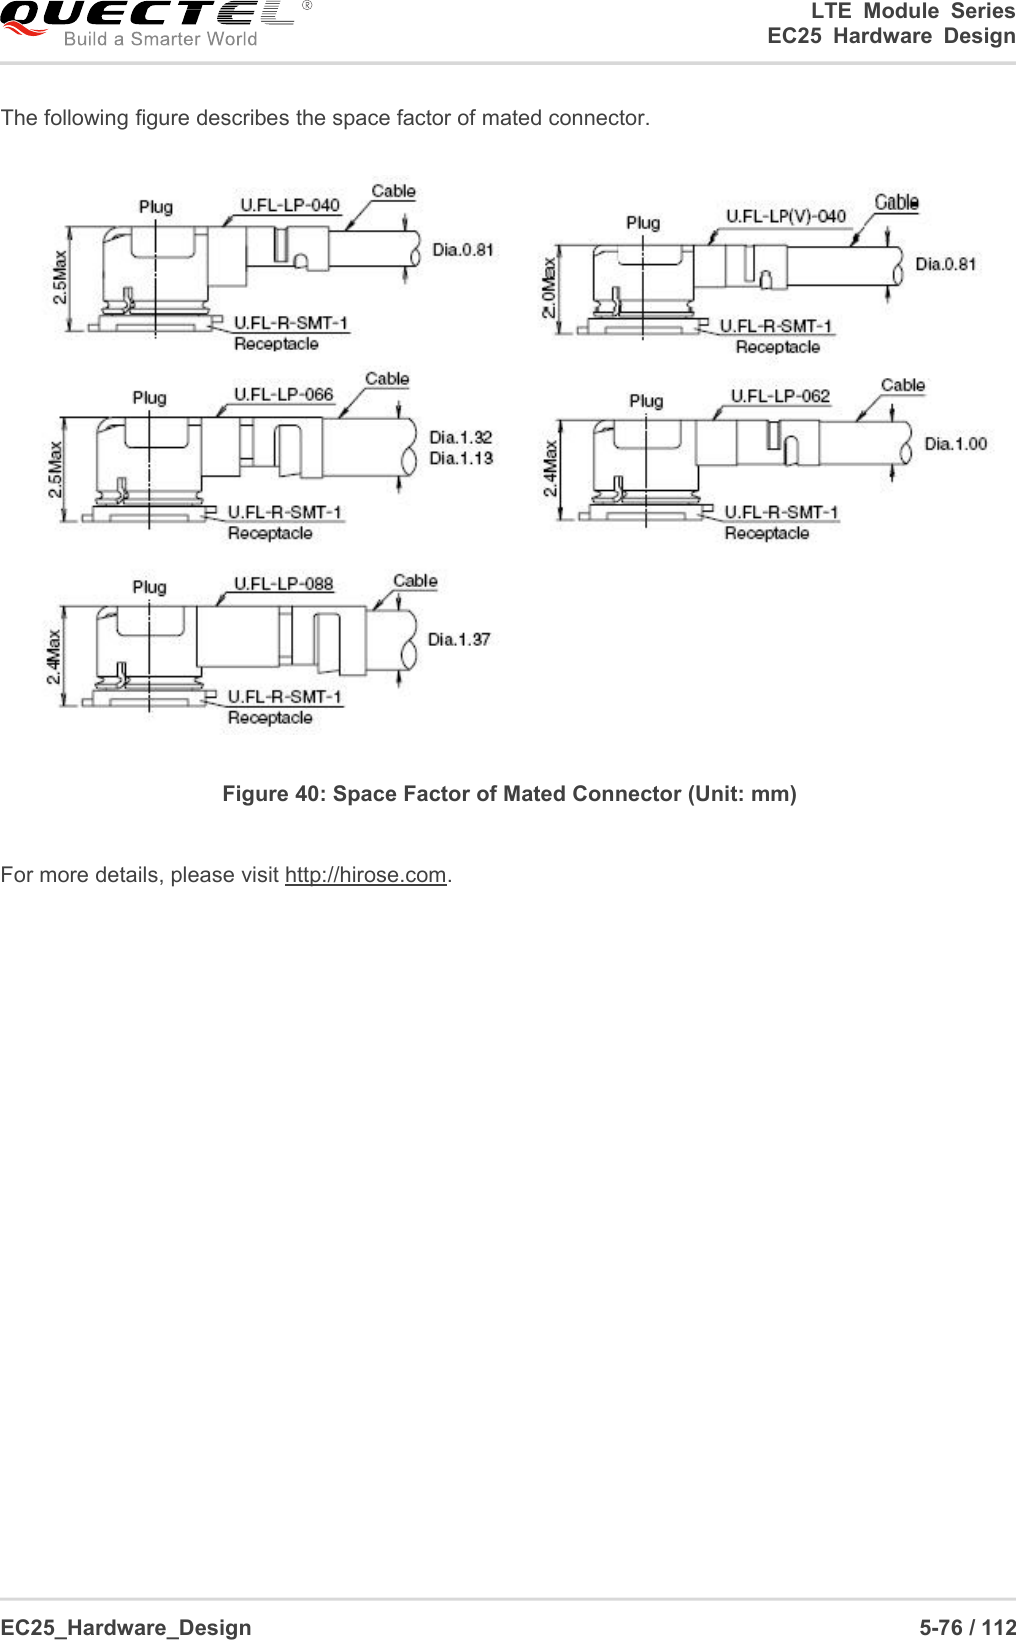 LTE Module SeriesEC25 Hardware DesignEC25_Hardware_Design 5-76 / 112The following figure describes the space factor of mated connector.Figure 40: Space Factor of Mated Connector (Unit: mm)For more details, please visit http://hirose.com.